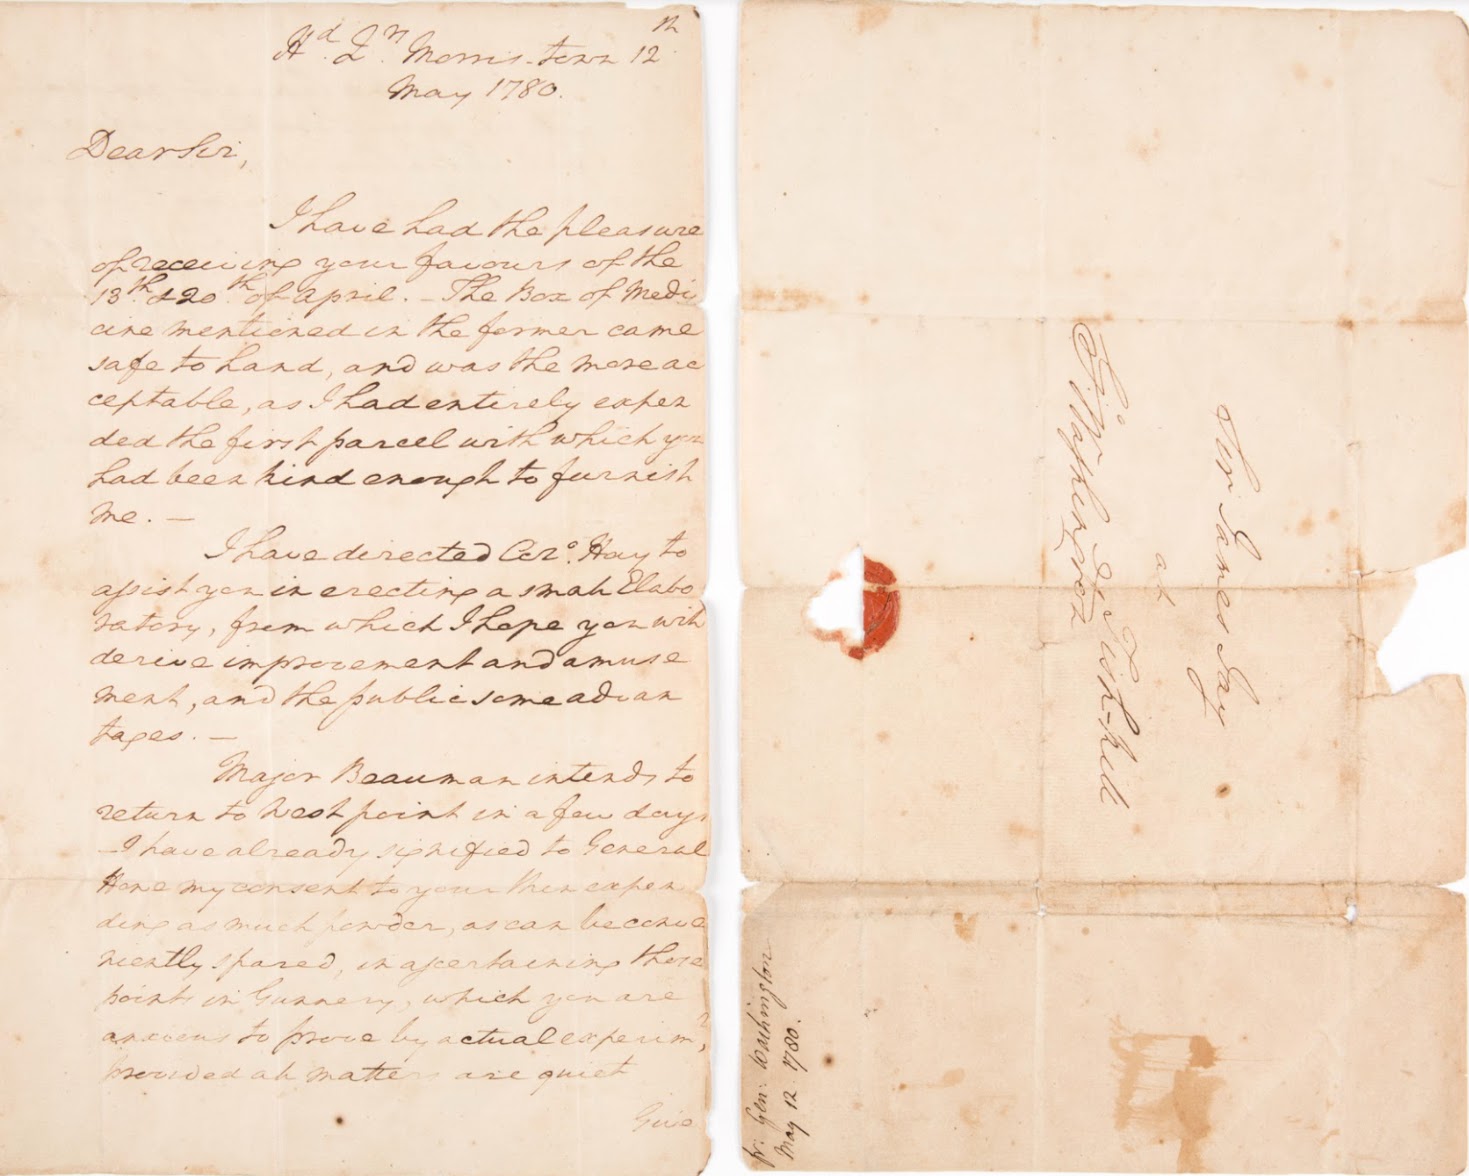 Washington’s coded letter of May 12, 1780, part of the collection at SPYSCAPE's HQ in NYC